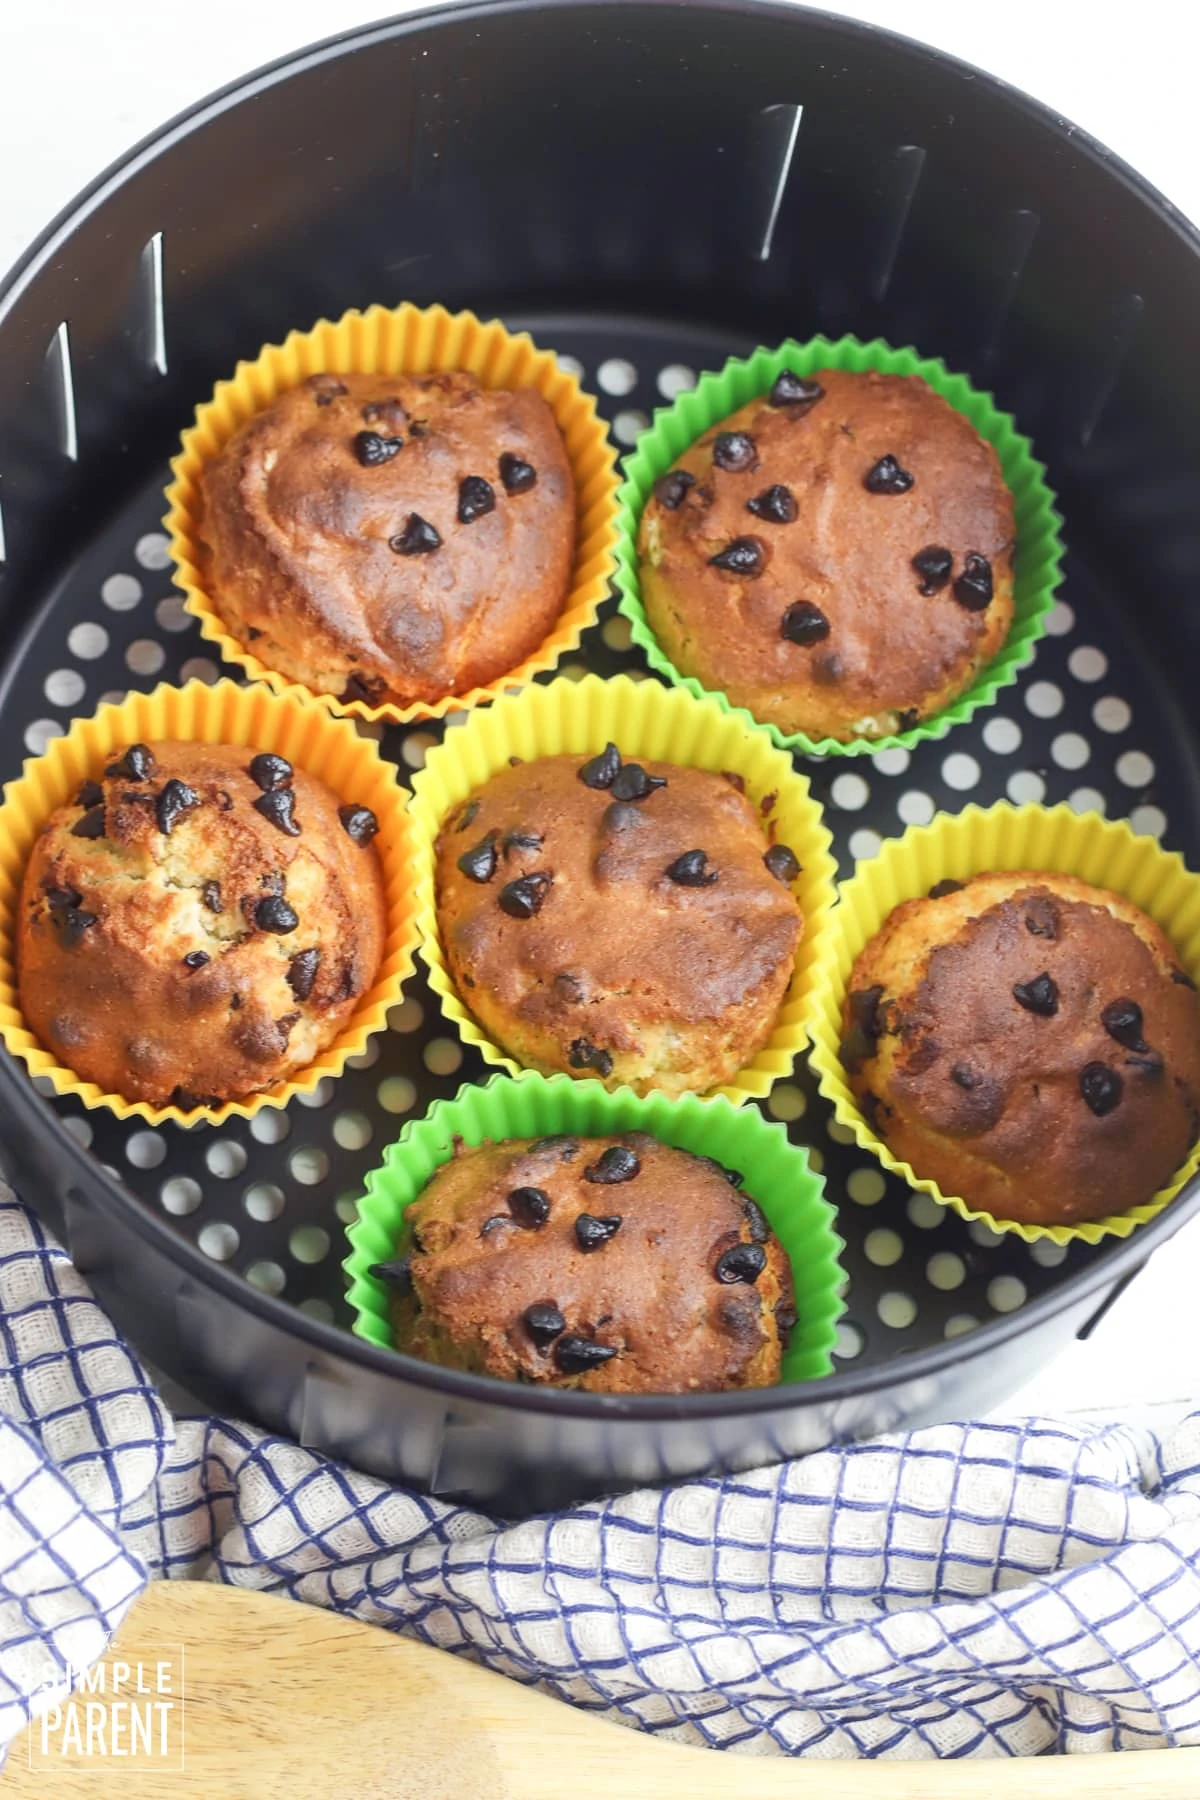 Baked muffins in air fryer basket